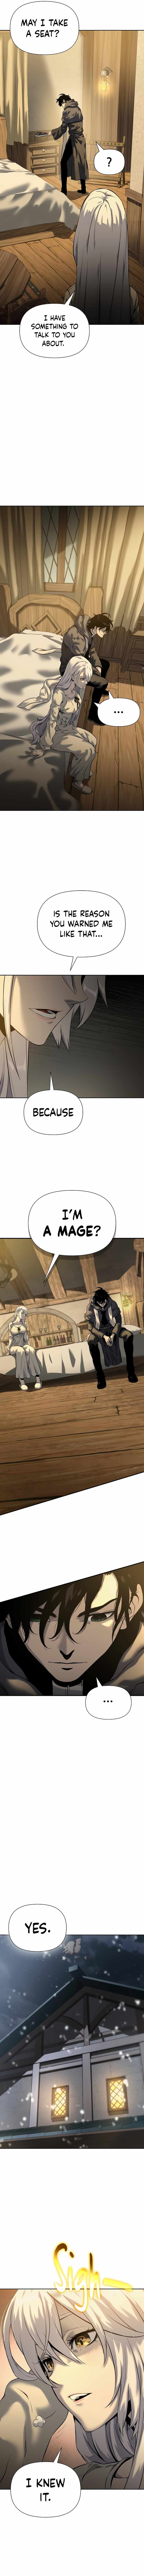 The Priest of Corruption Chapter 17-eng-li - Page 9